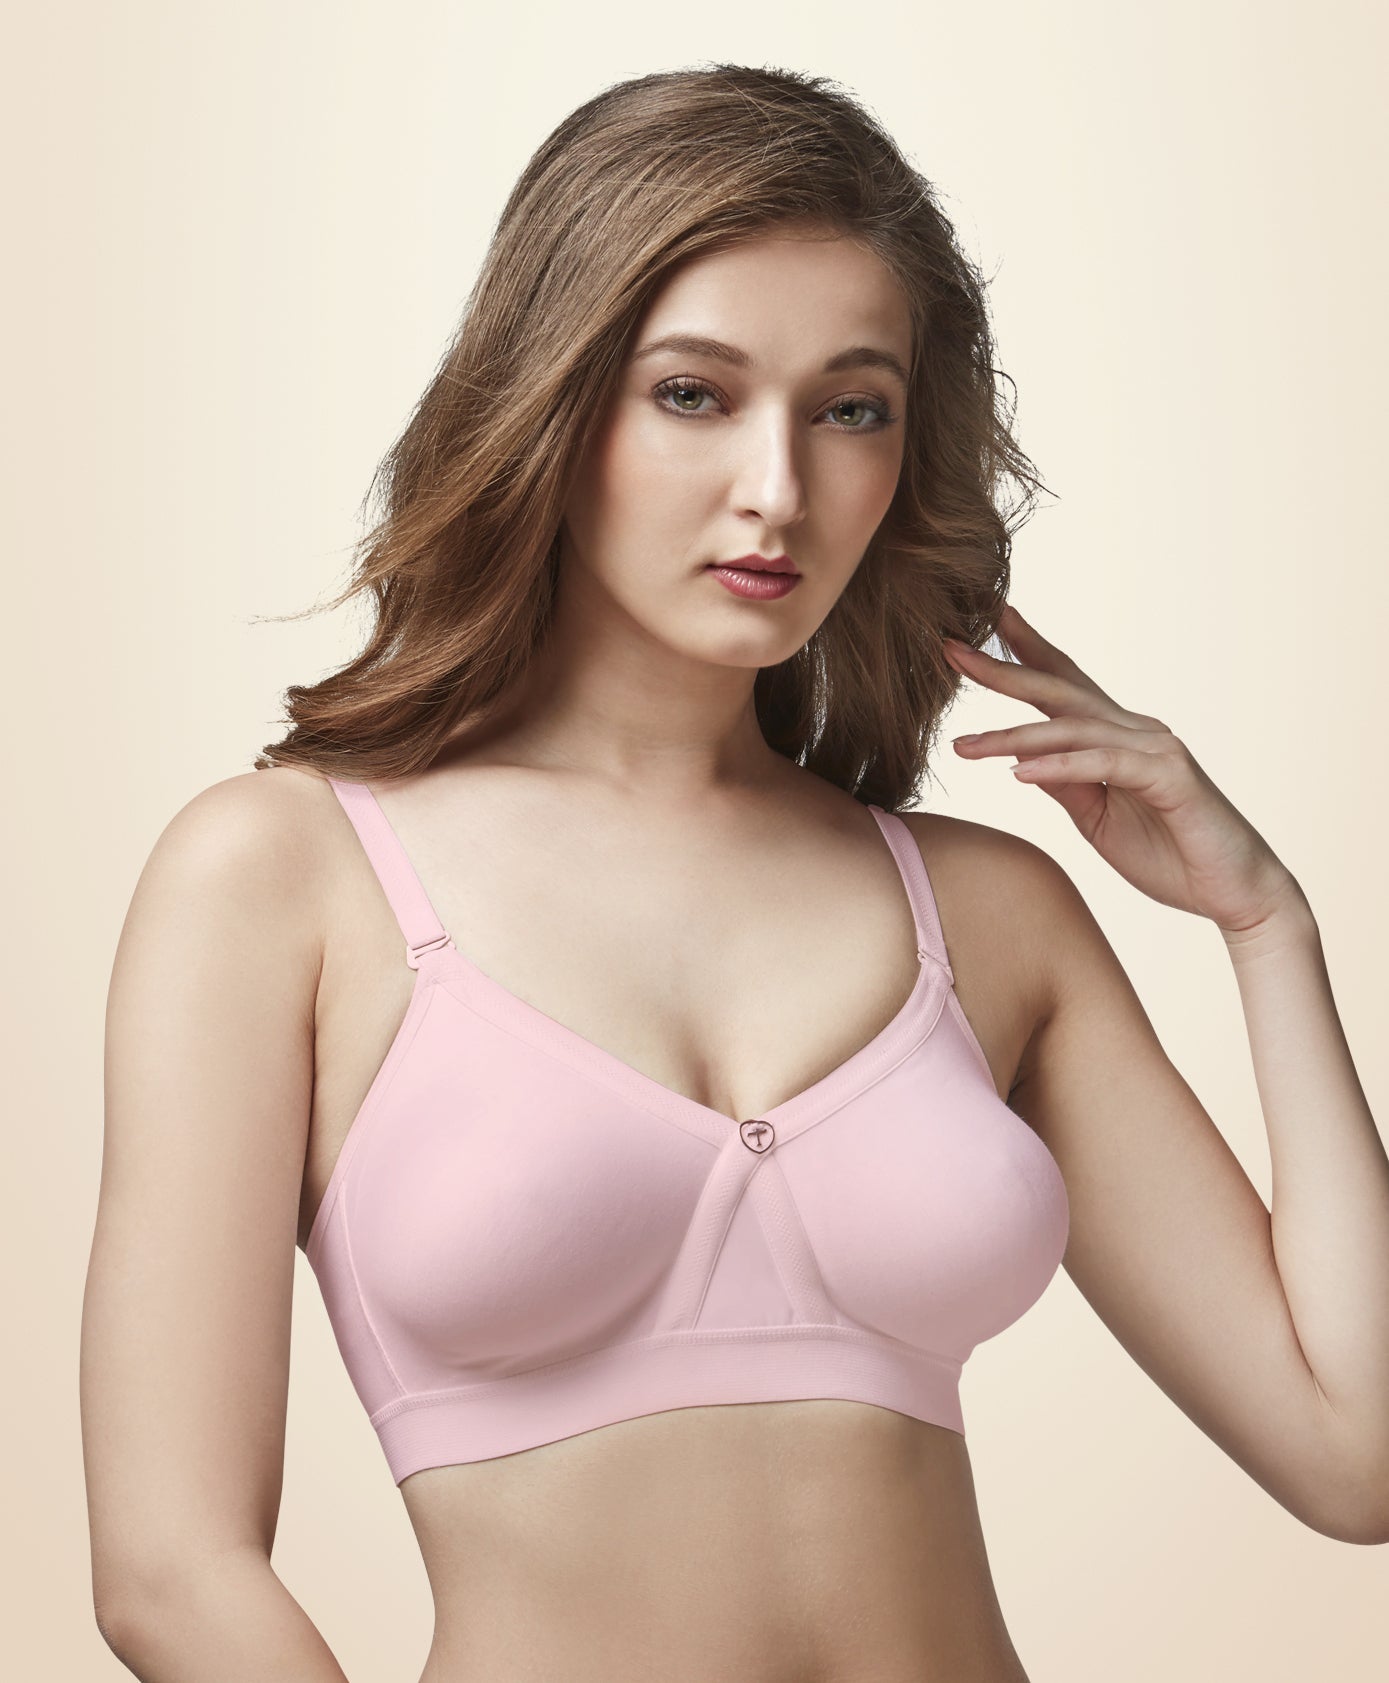 Buy Trylo Touche Woman Soft Padded Full Cup Bra - White Online